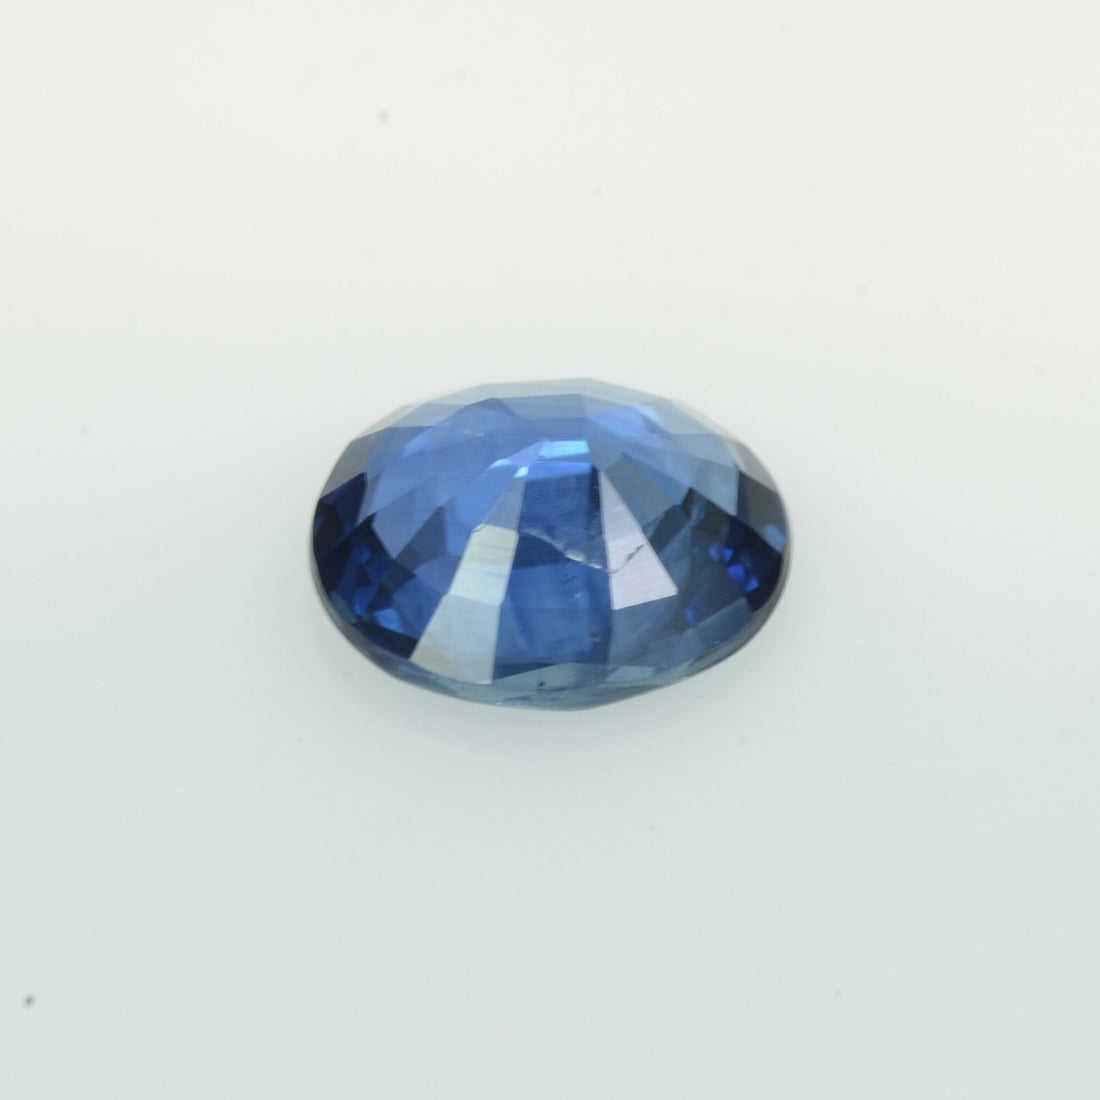 0.68 cts Natural Blue Sapphire Loose Gemstone Oval Cut